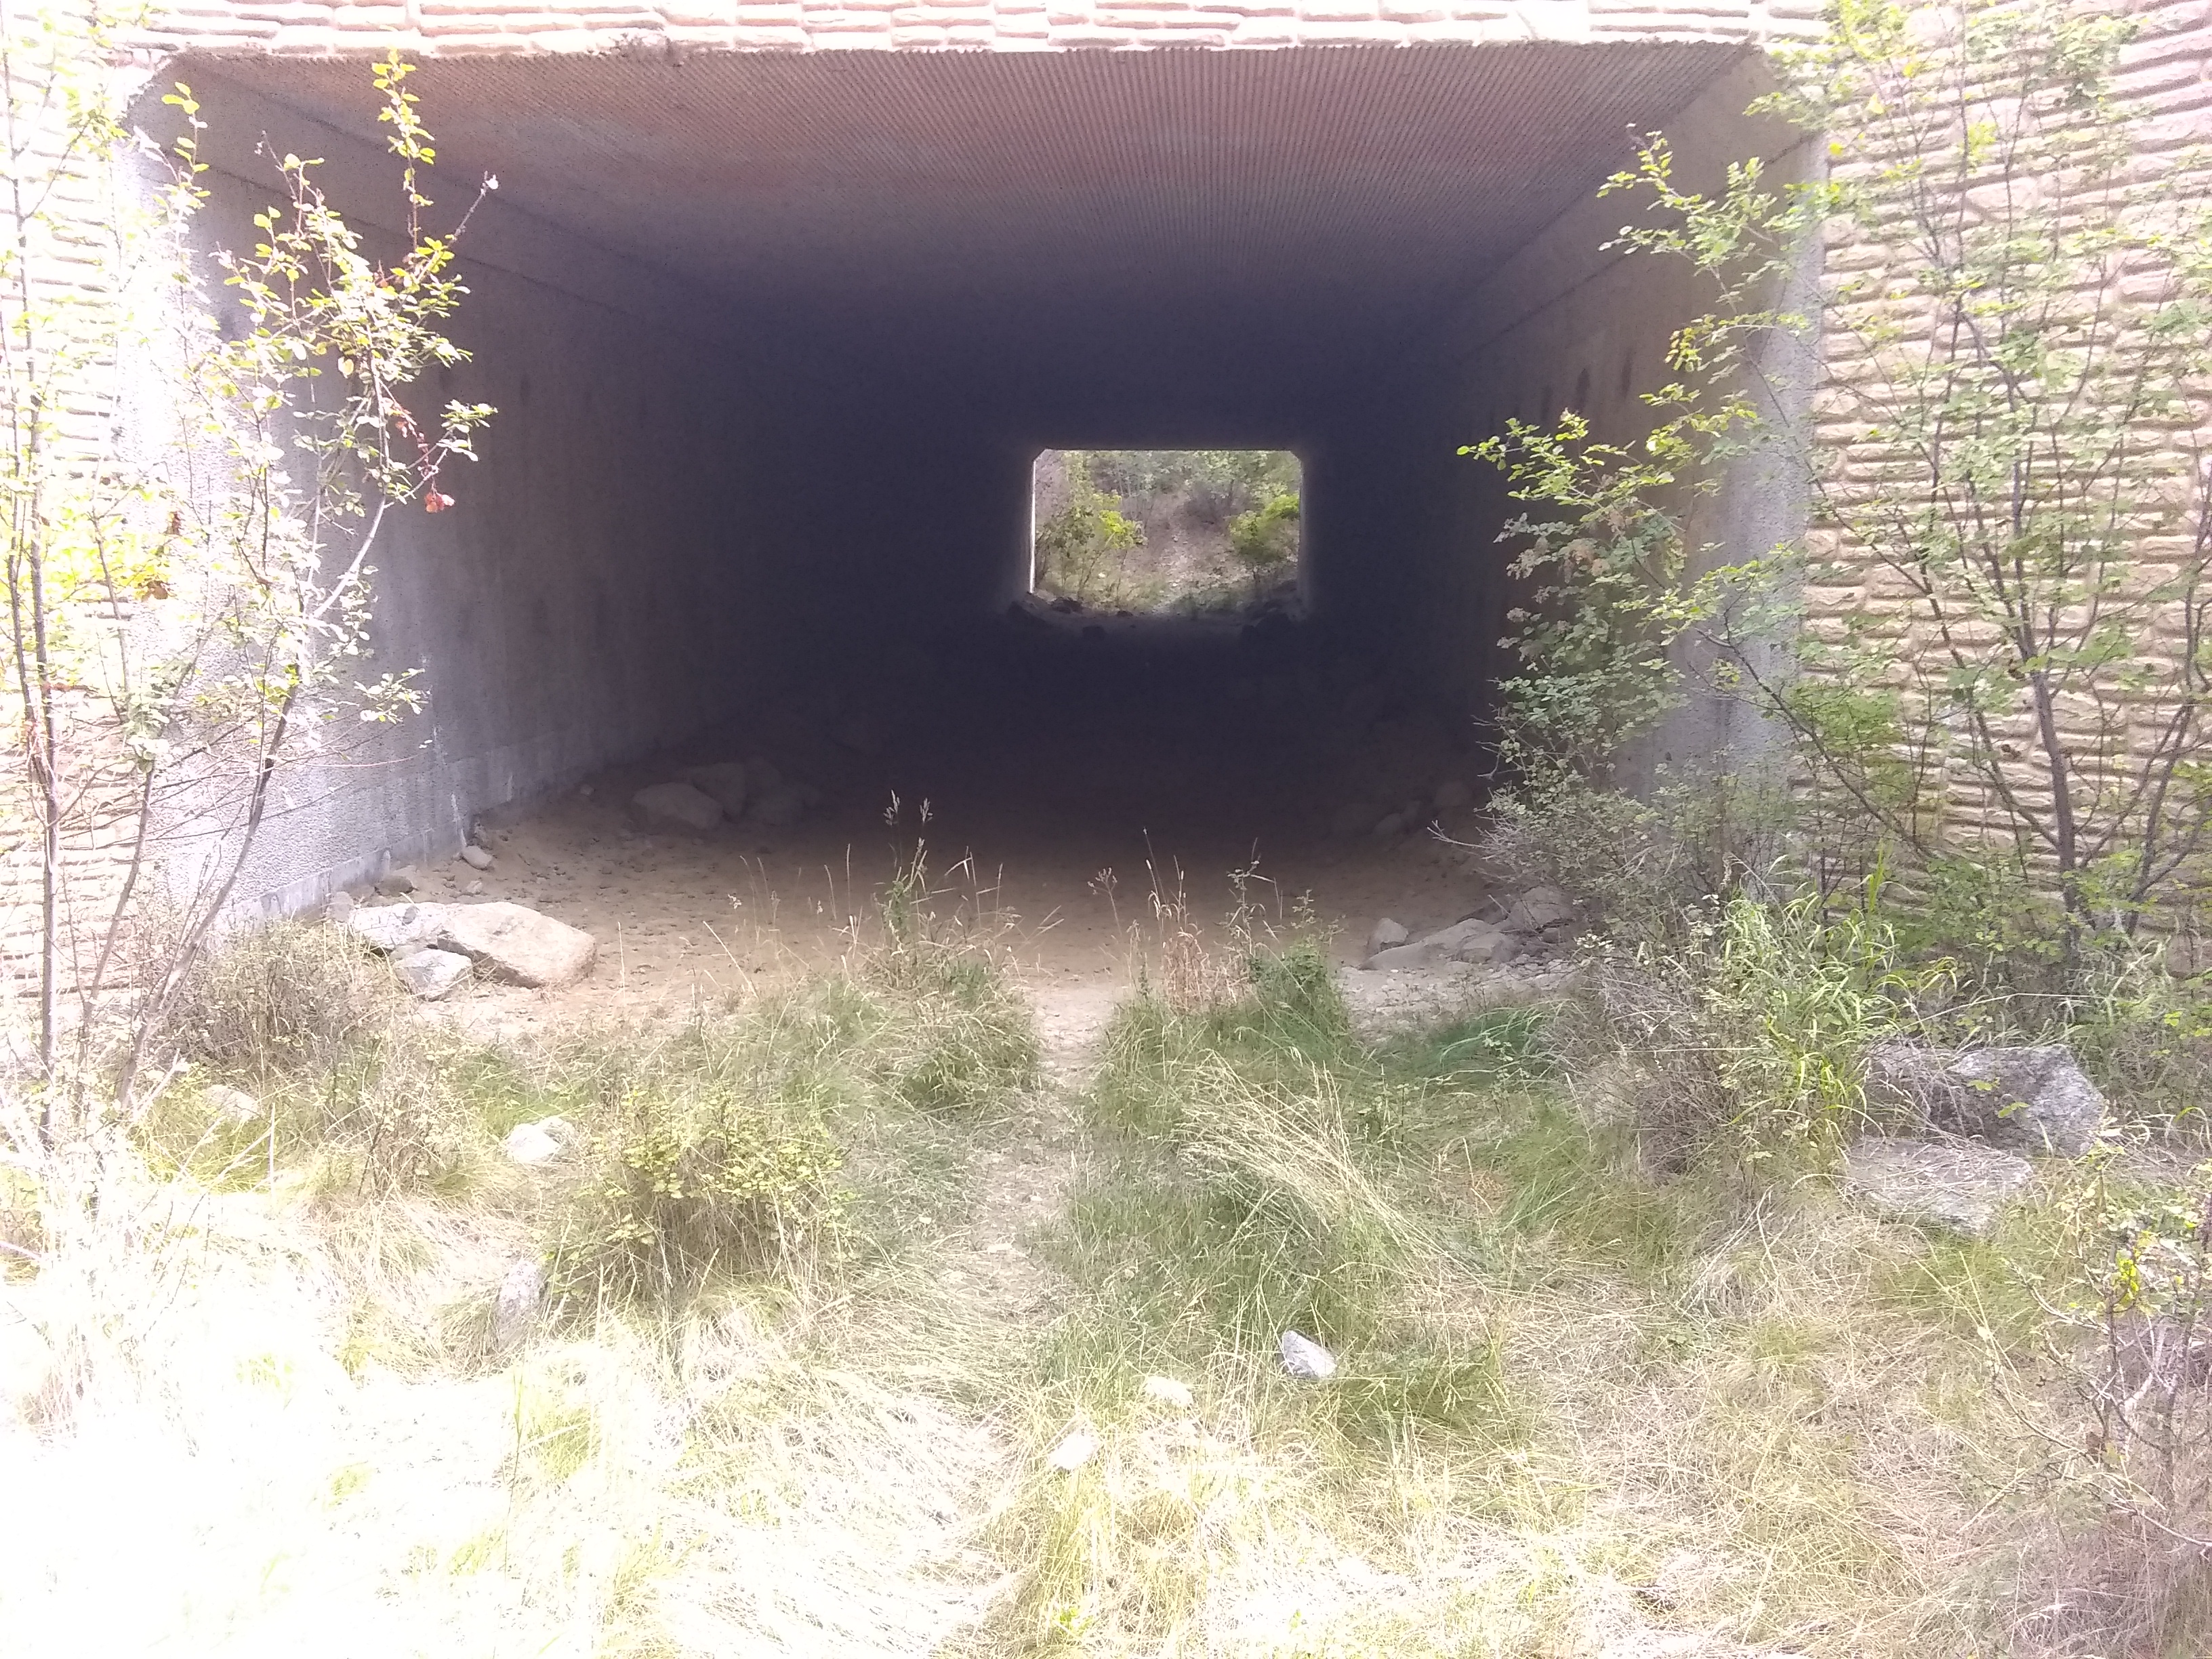 Inside view of wildlife underpass on US Highway 95 in North Idaho